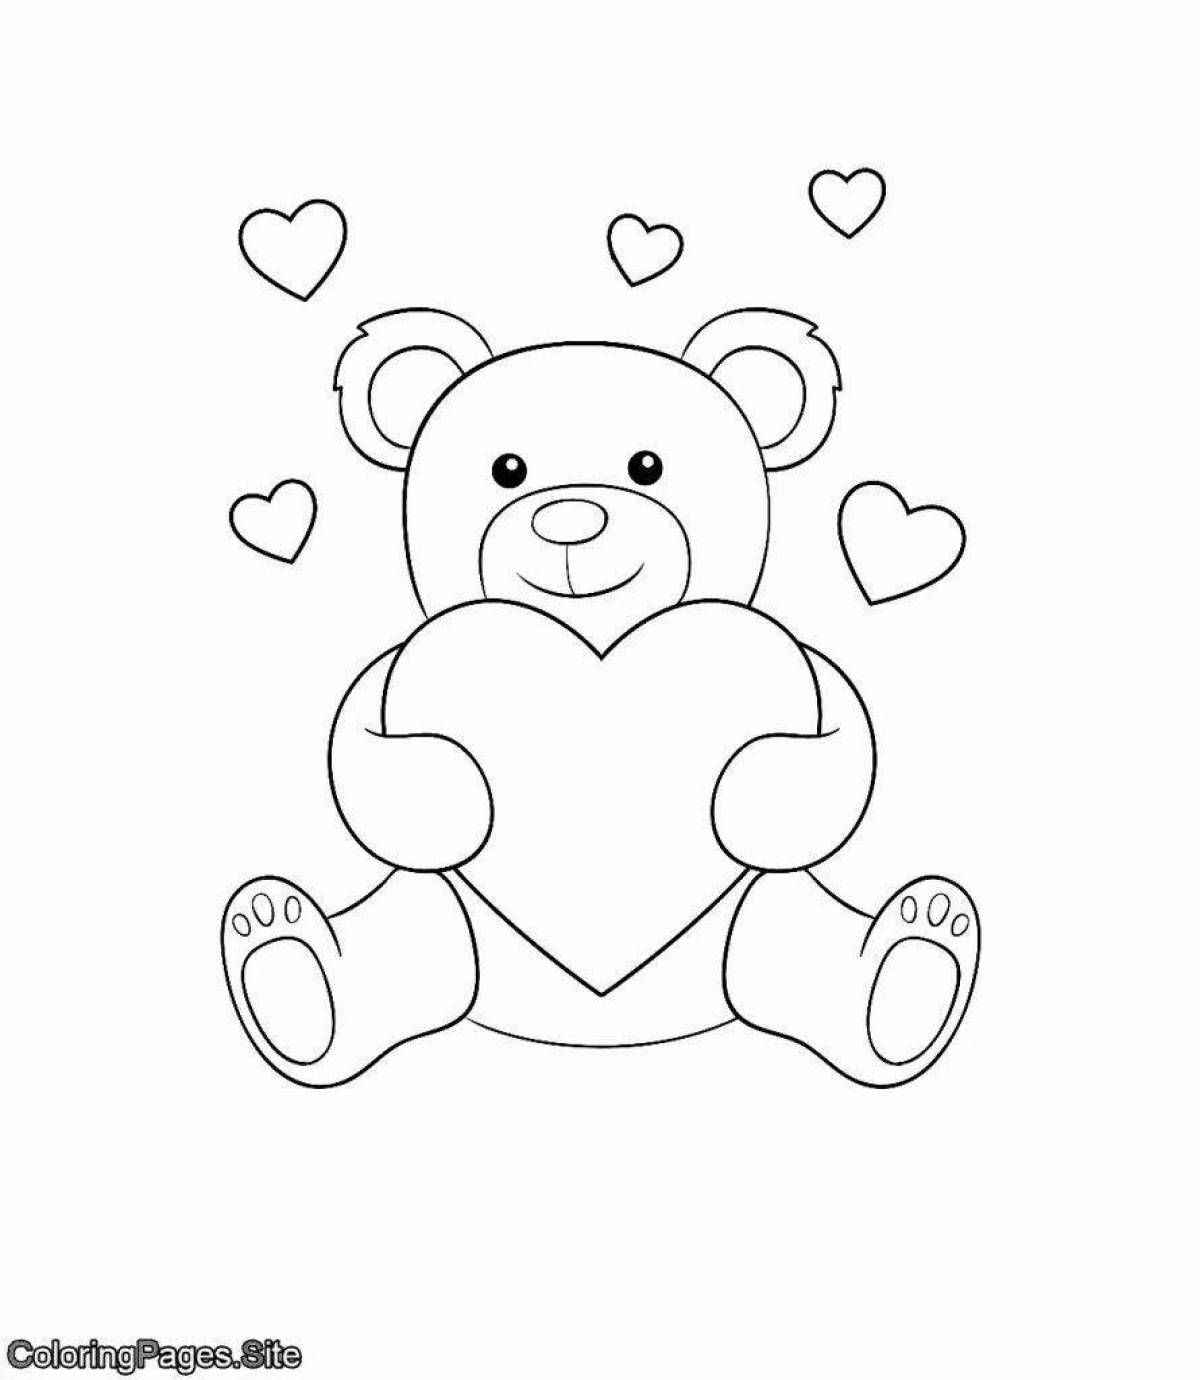 Coloring book magic bear with a bow